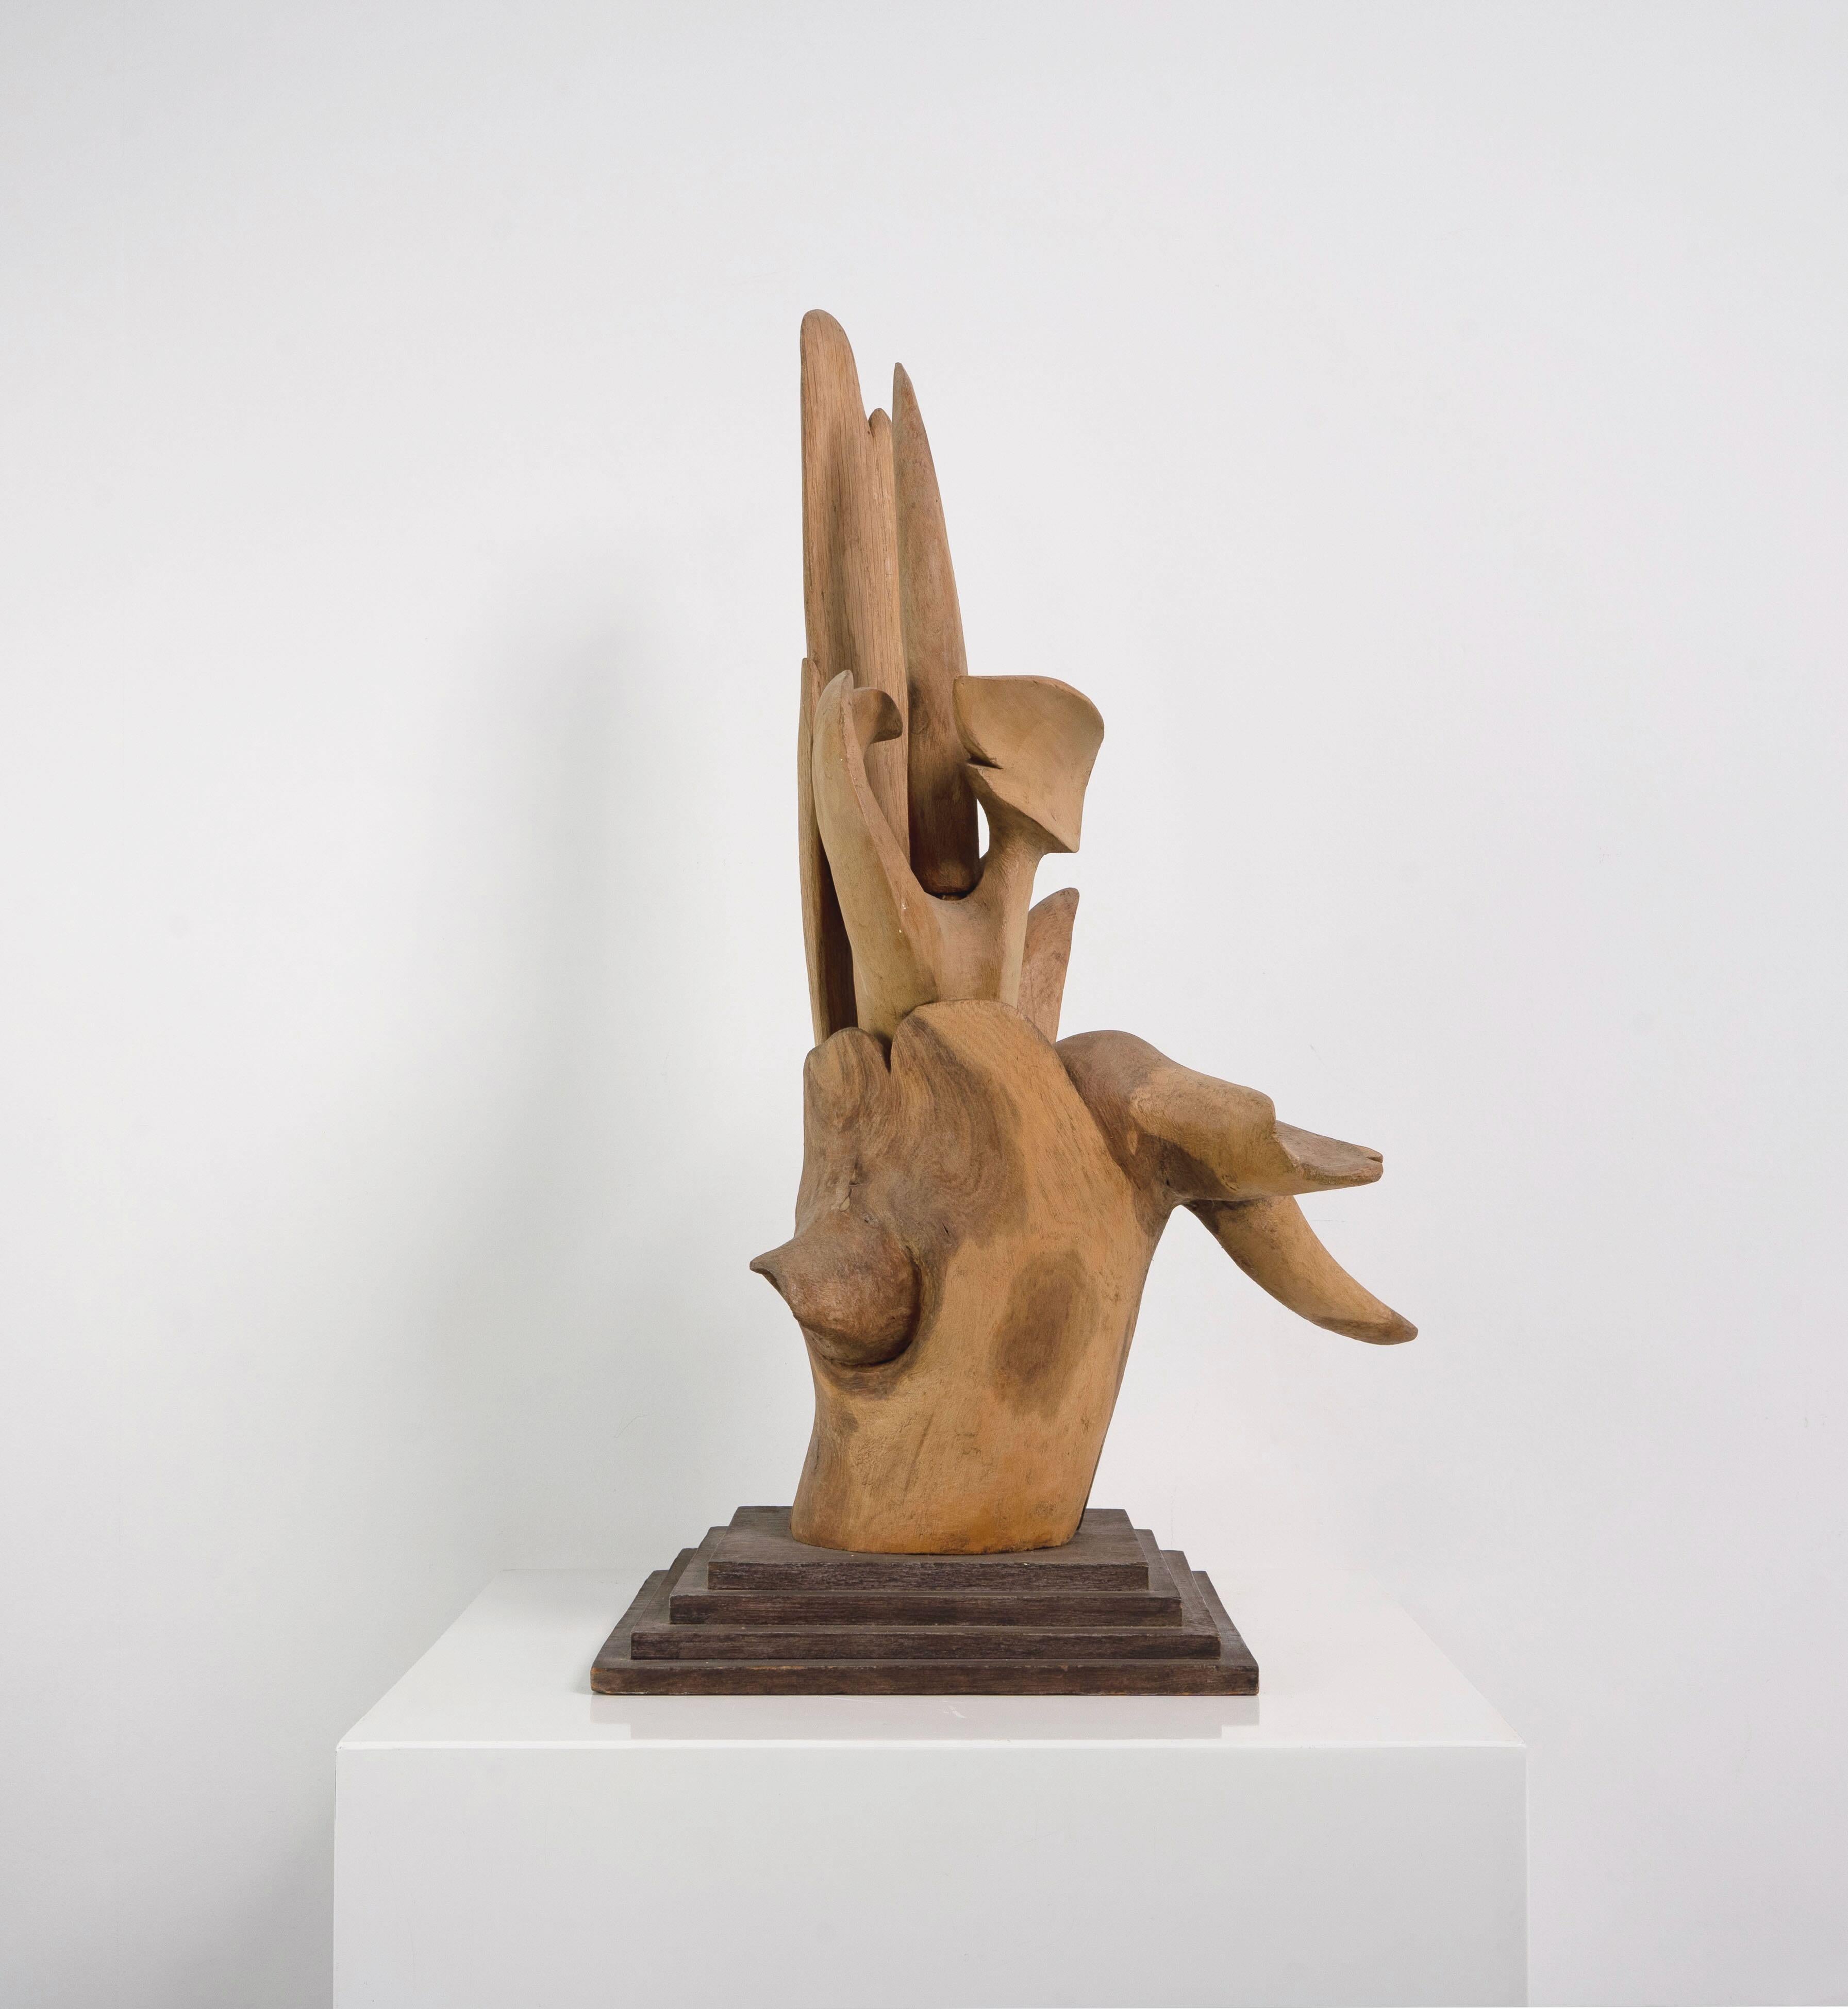 An abstract wooden sculpture attributed to Willi Soukop (1907 - 1995).

Willi Soukop was a sculptor, member of the Royal Academy and early teacher of Elisabeth Frink. Soukop's work is prominently on display at Hull University in front of the